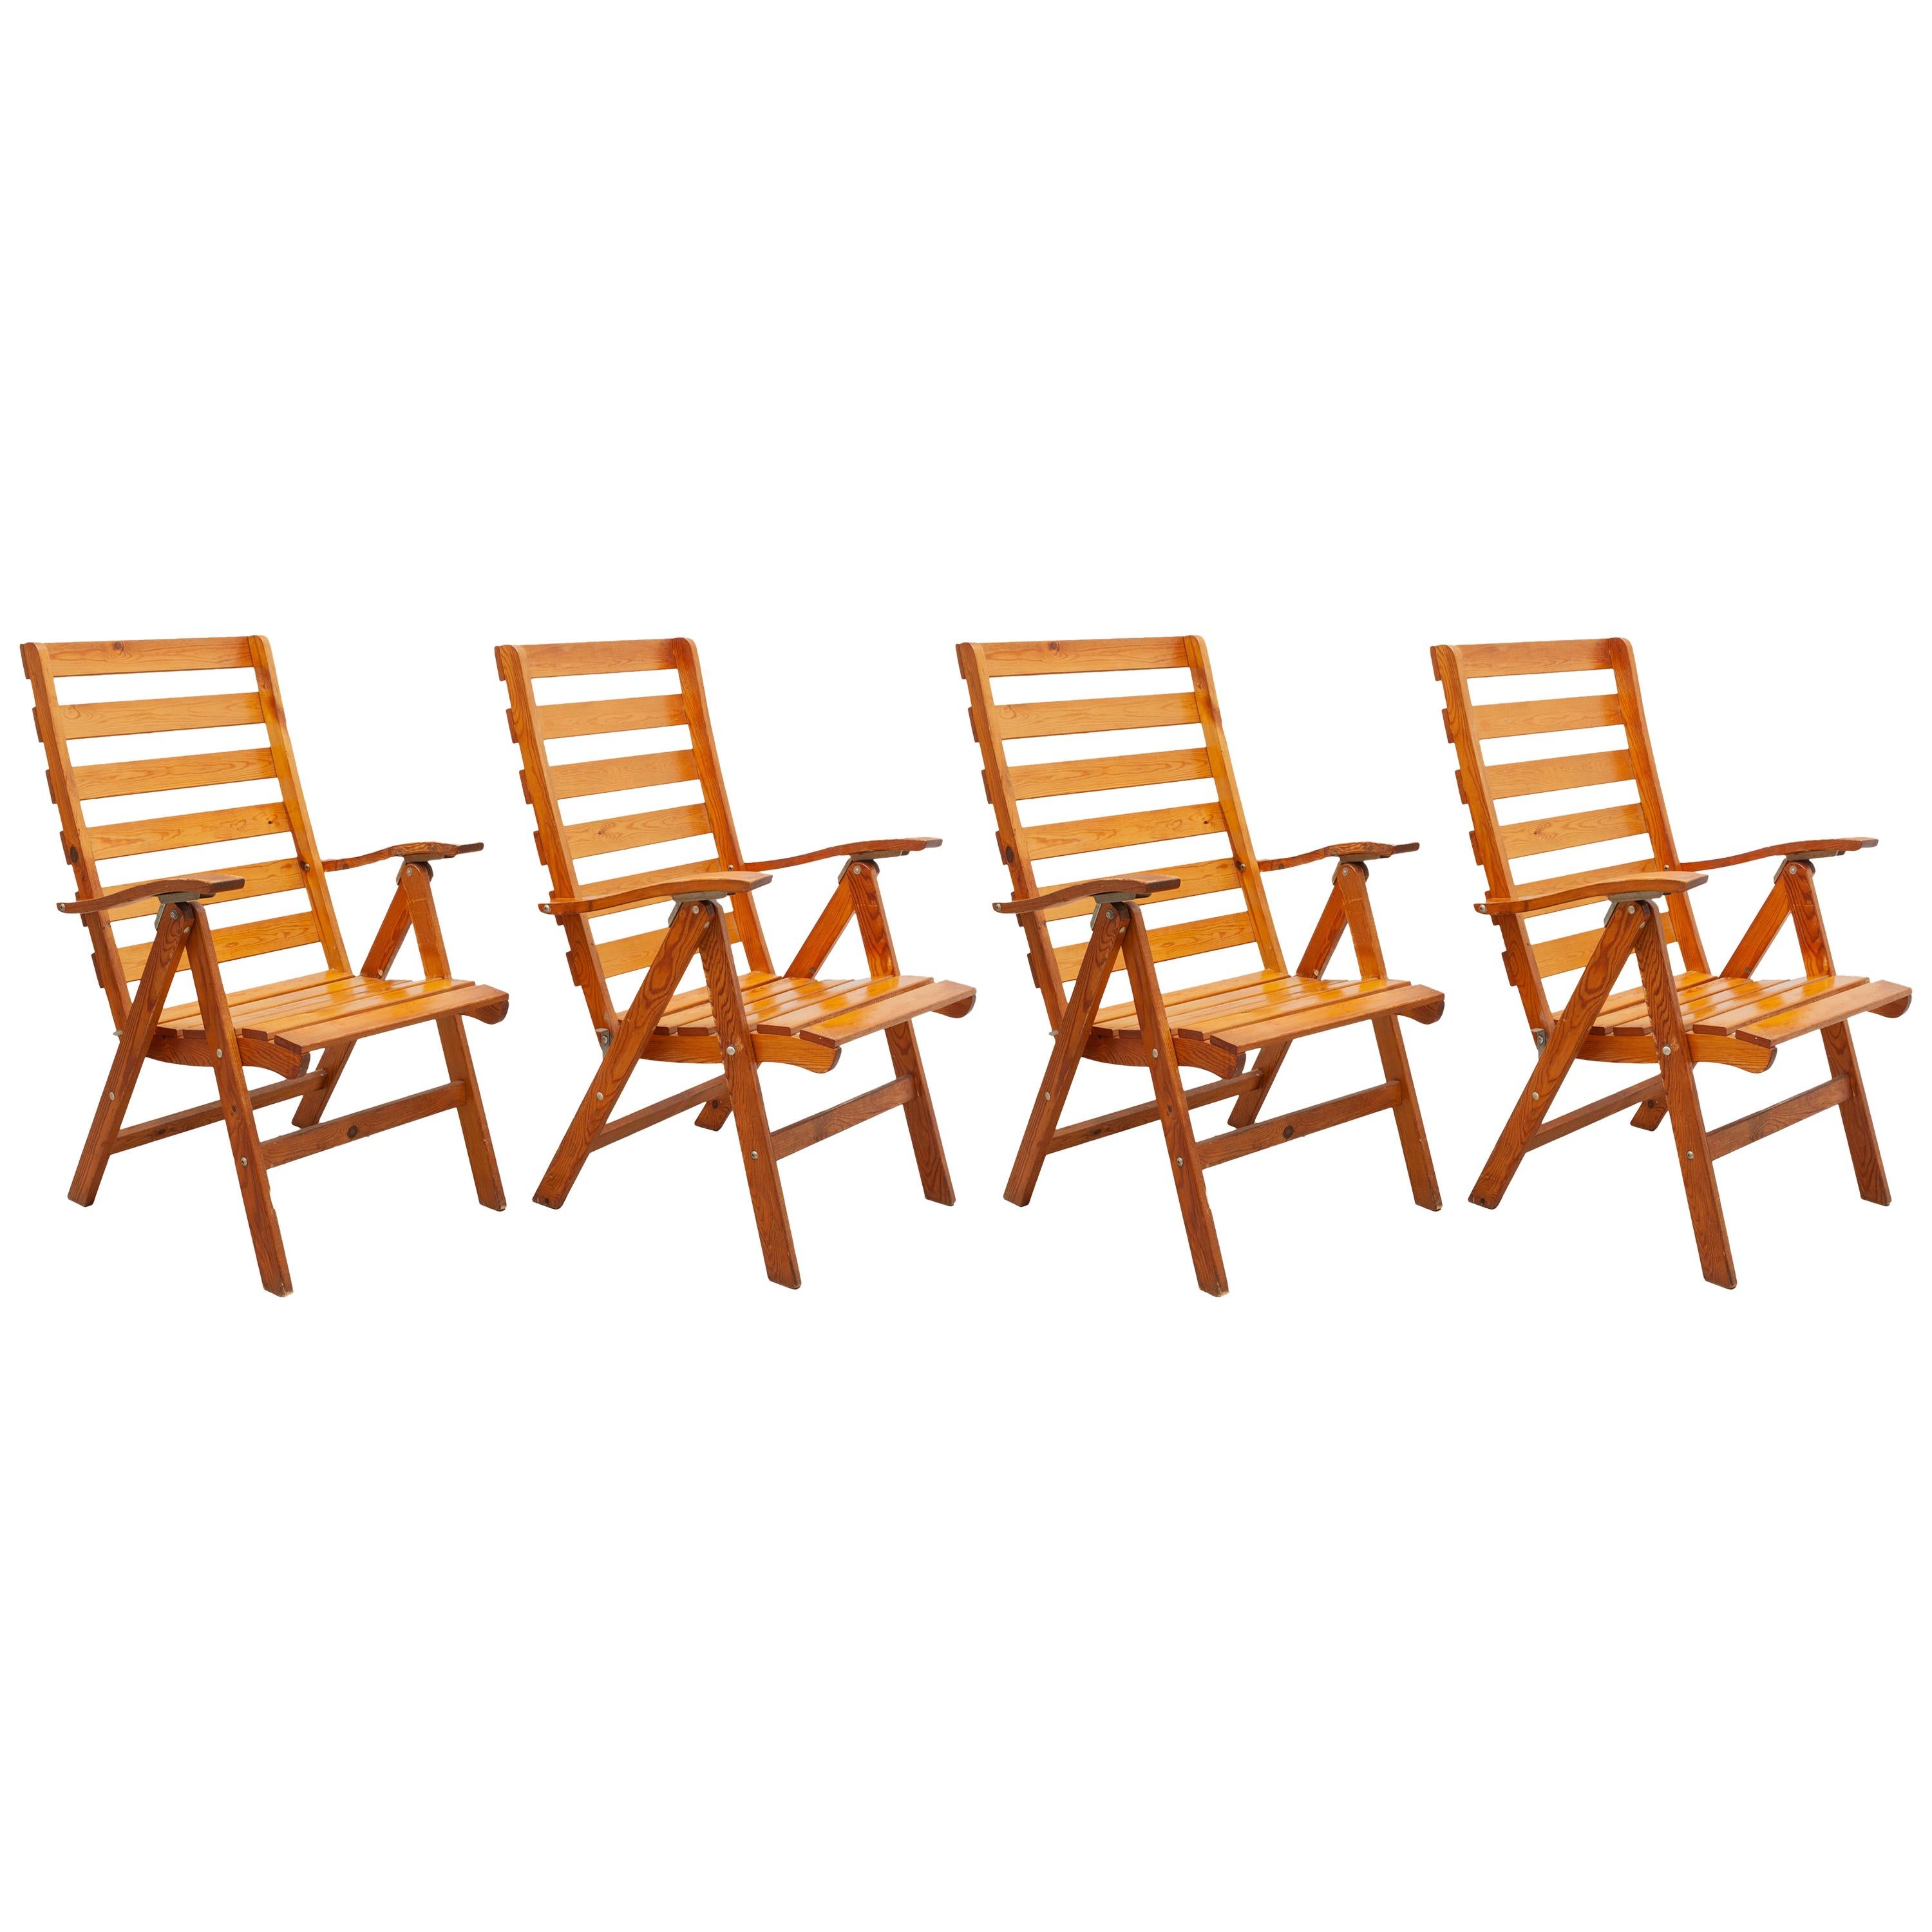 Solid Pine Slat Folding Outdoor Chairs, 1950s